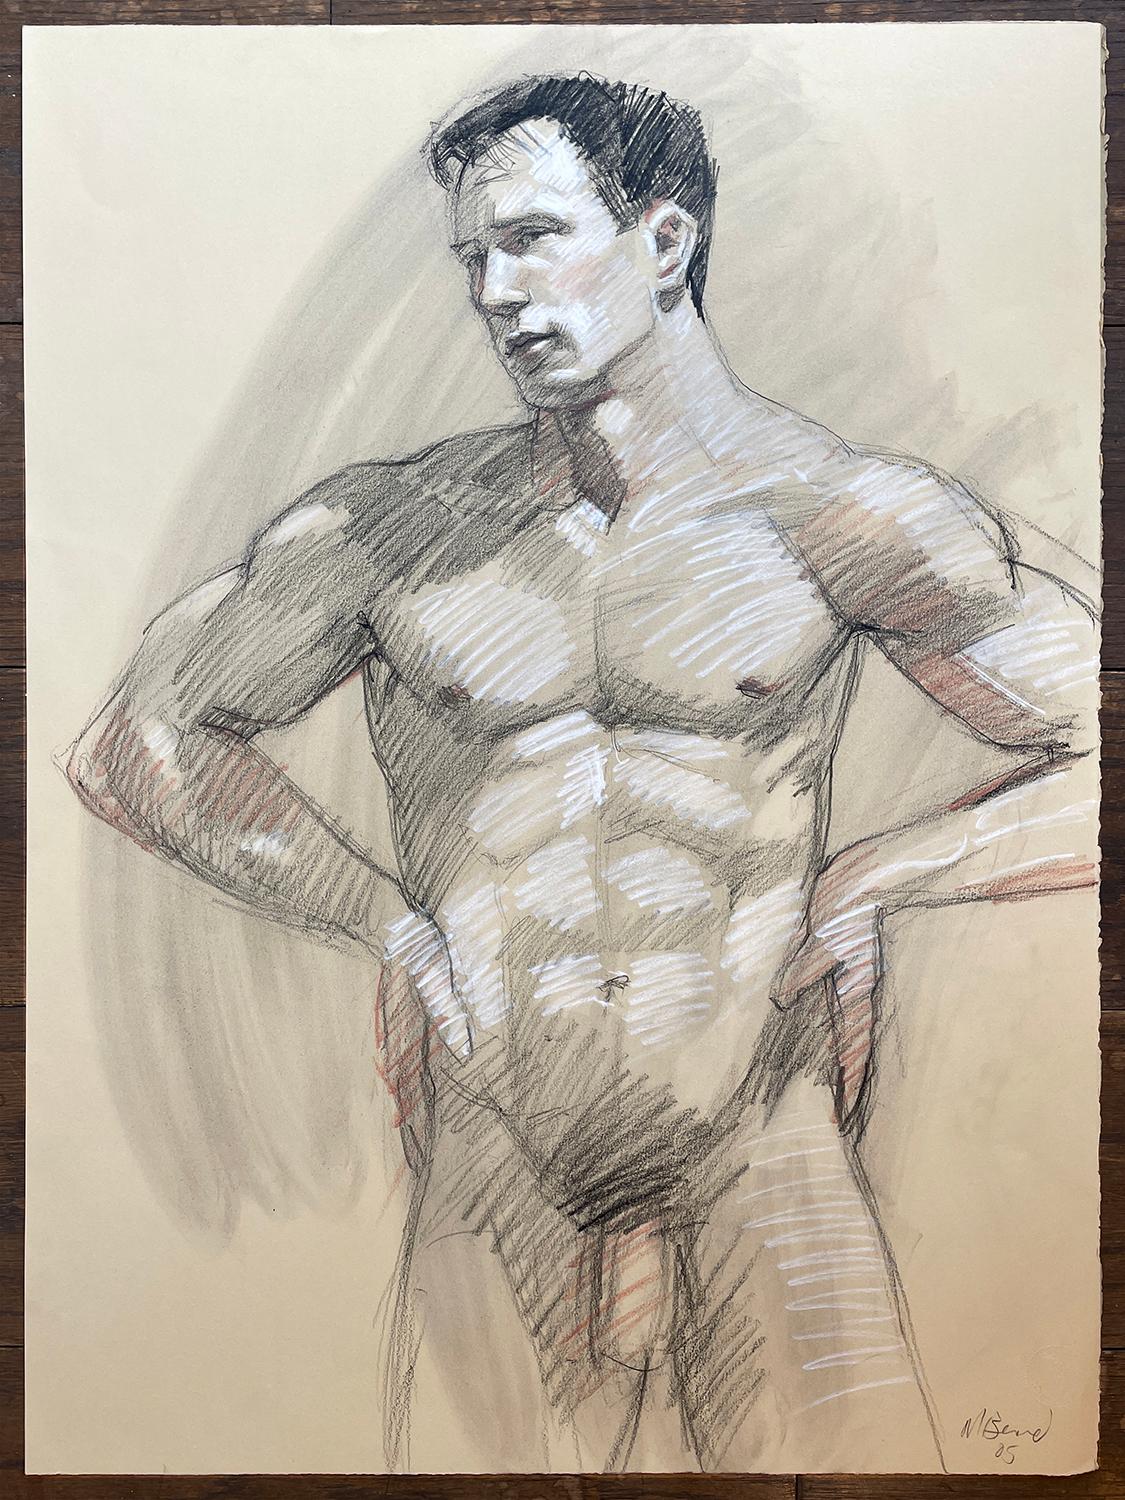 MB 079 (Contemporary Life Drawing of Male Nude by Mark Beard)